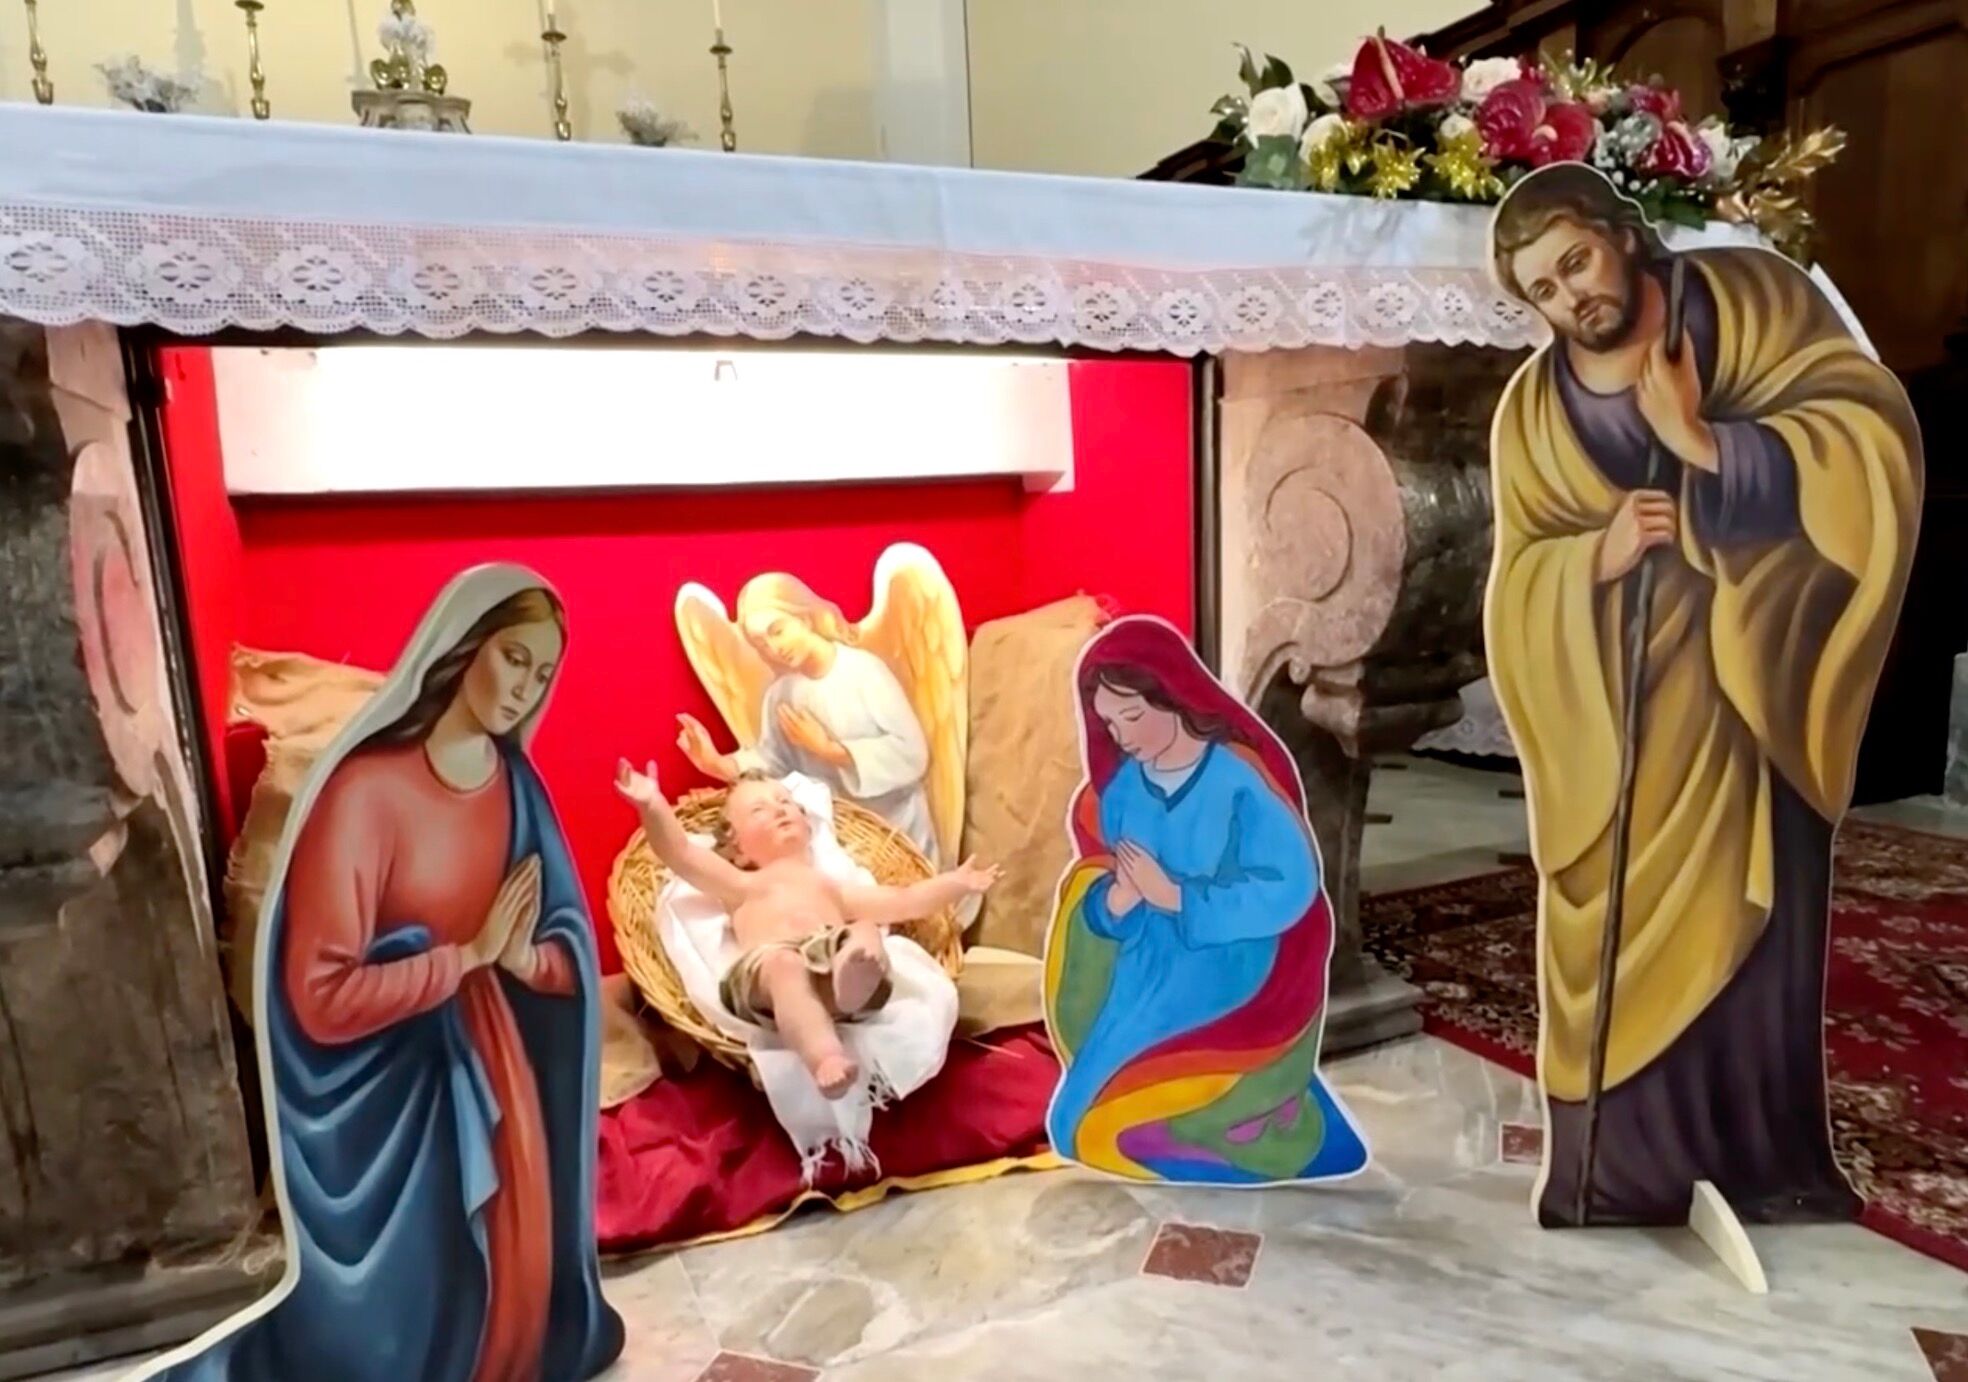 Nativity scene in Italy featuring the baby Jesus with two moms - the Virgin Mary and another woman wearing rainbow robes